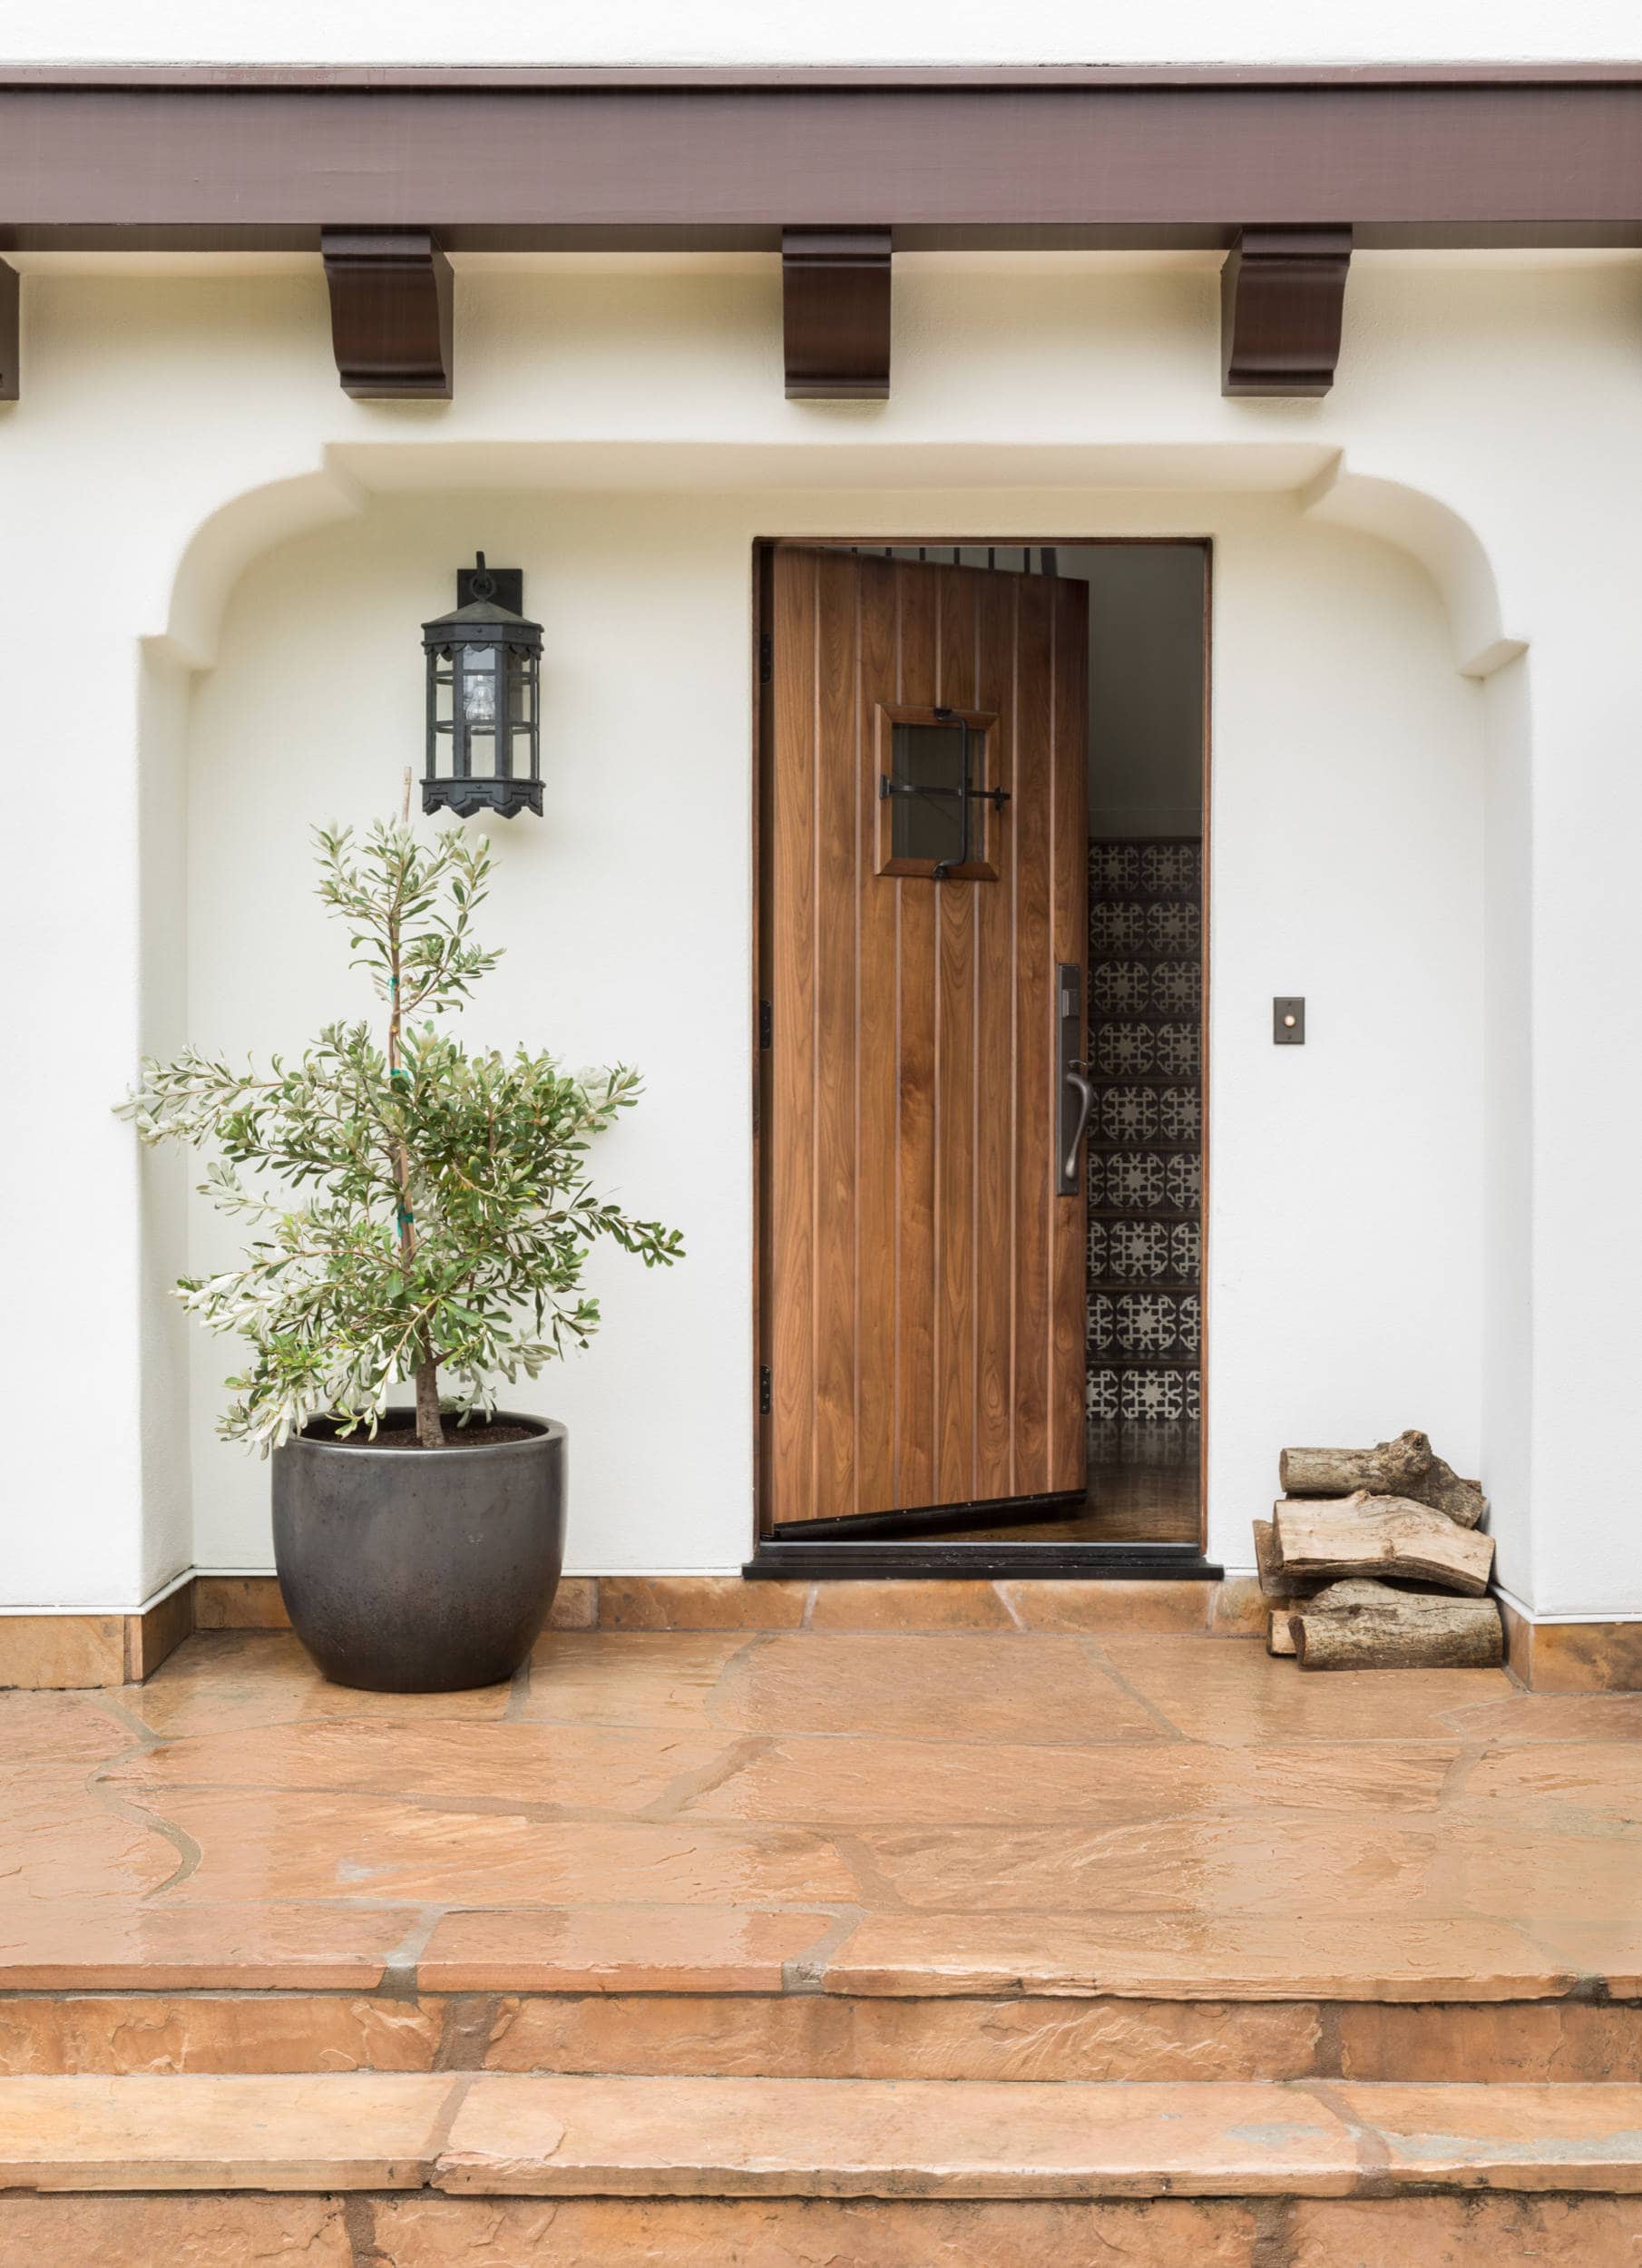 California Casual Design home tour in Hillsborough featuring front door in spanish colonial style